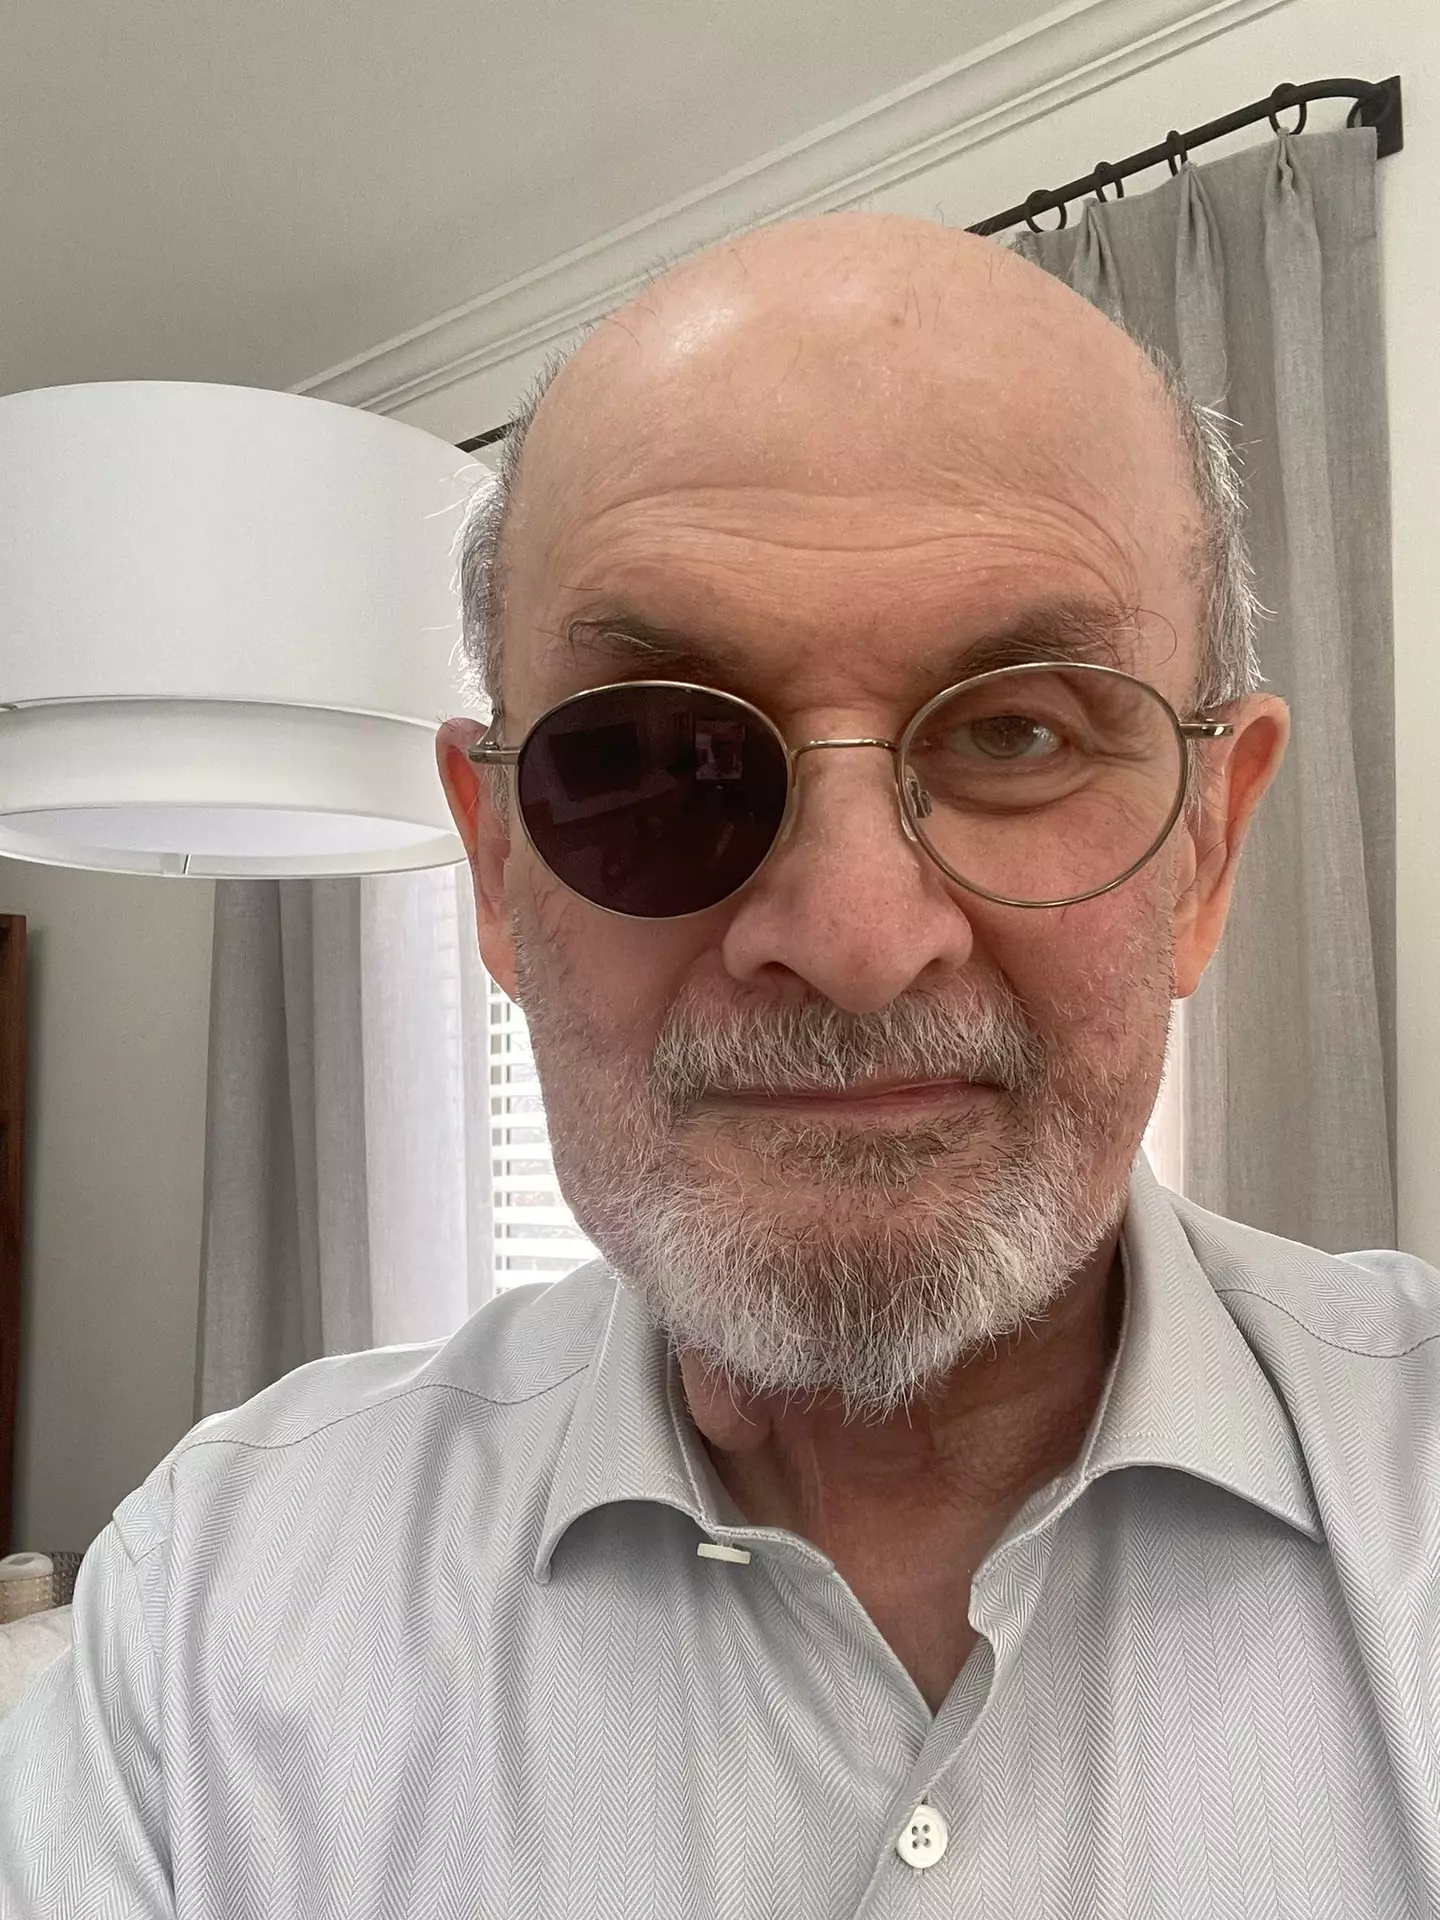 Sir Salman Rushdie has shared his first picture since being seriously injured in a horrific assassination attempt.